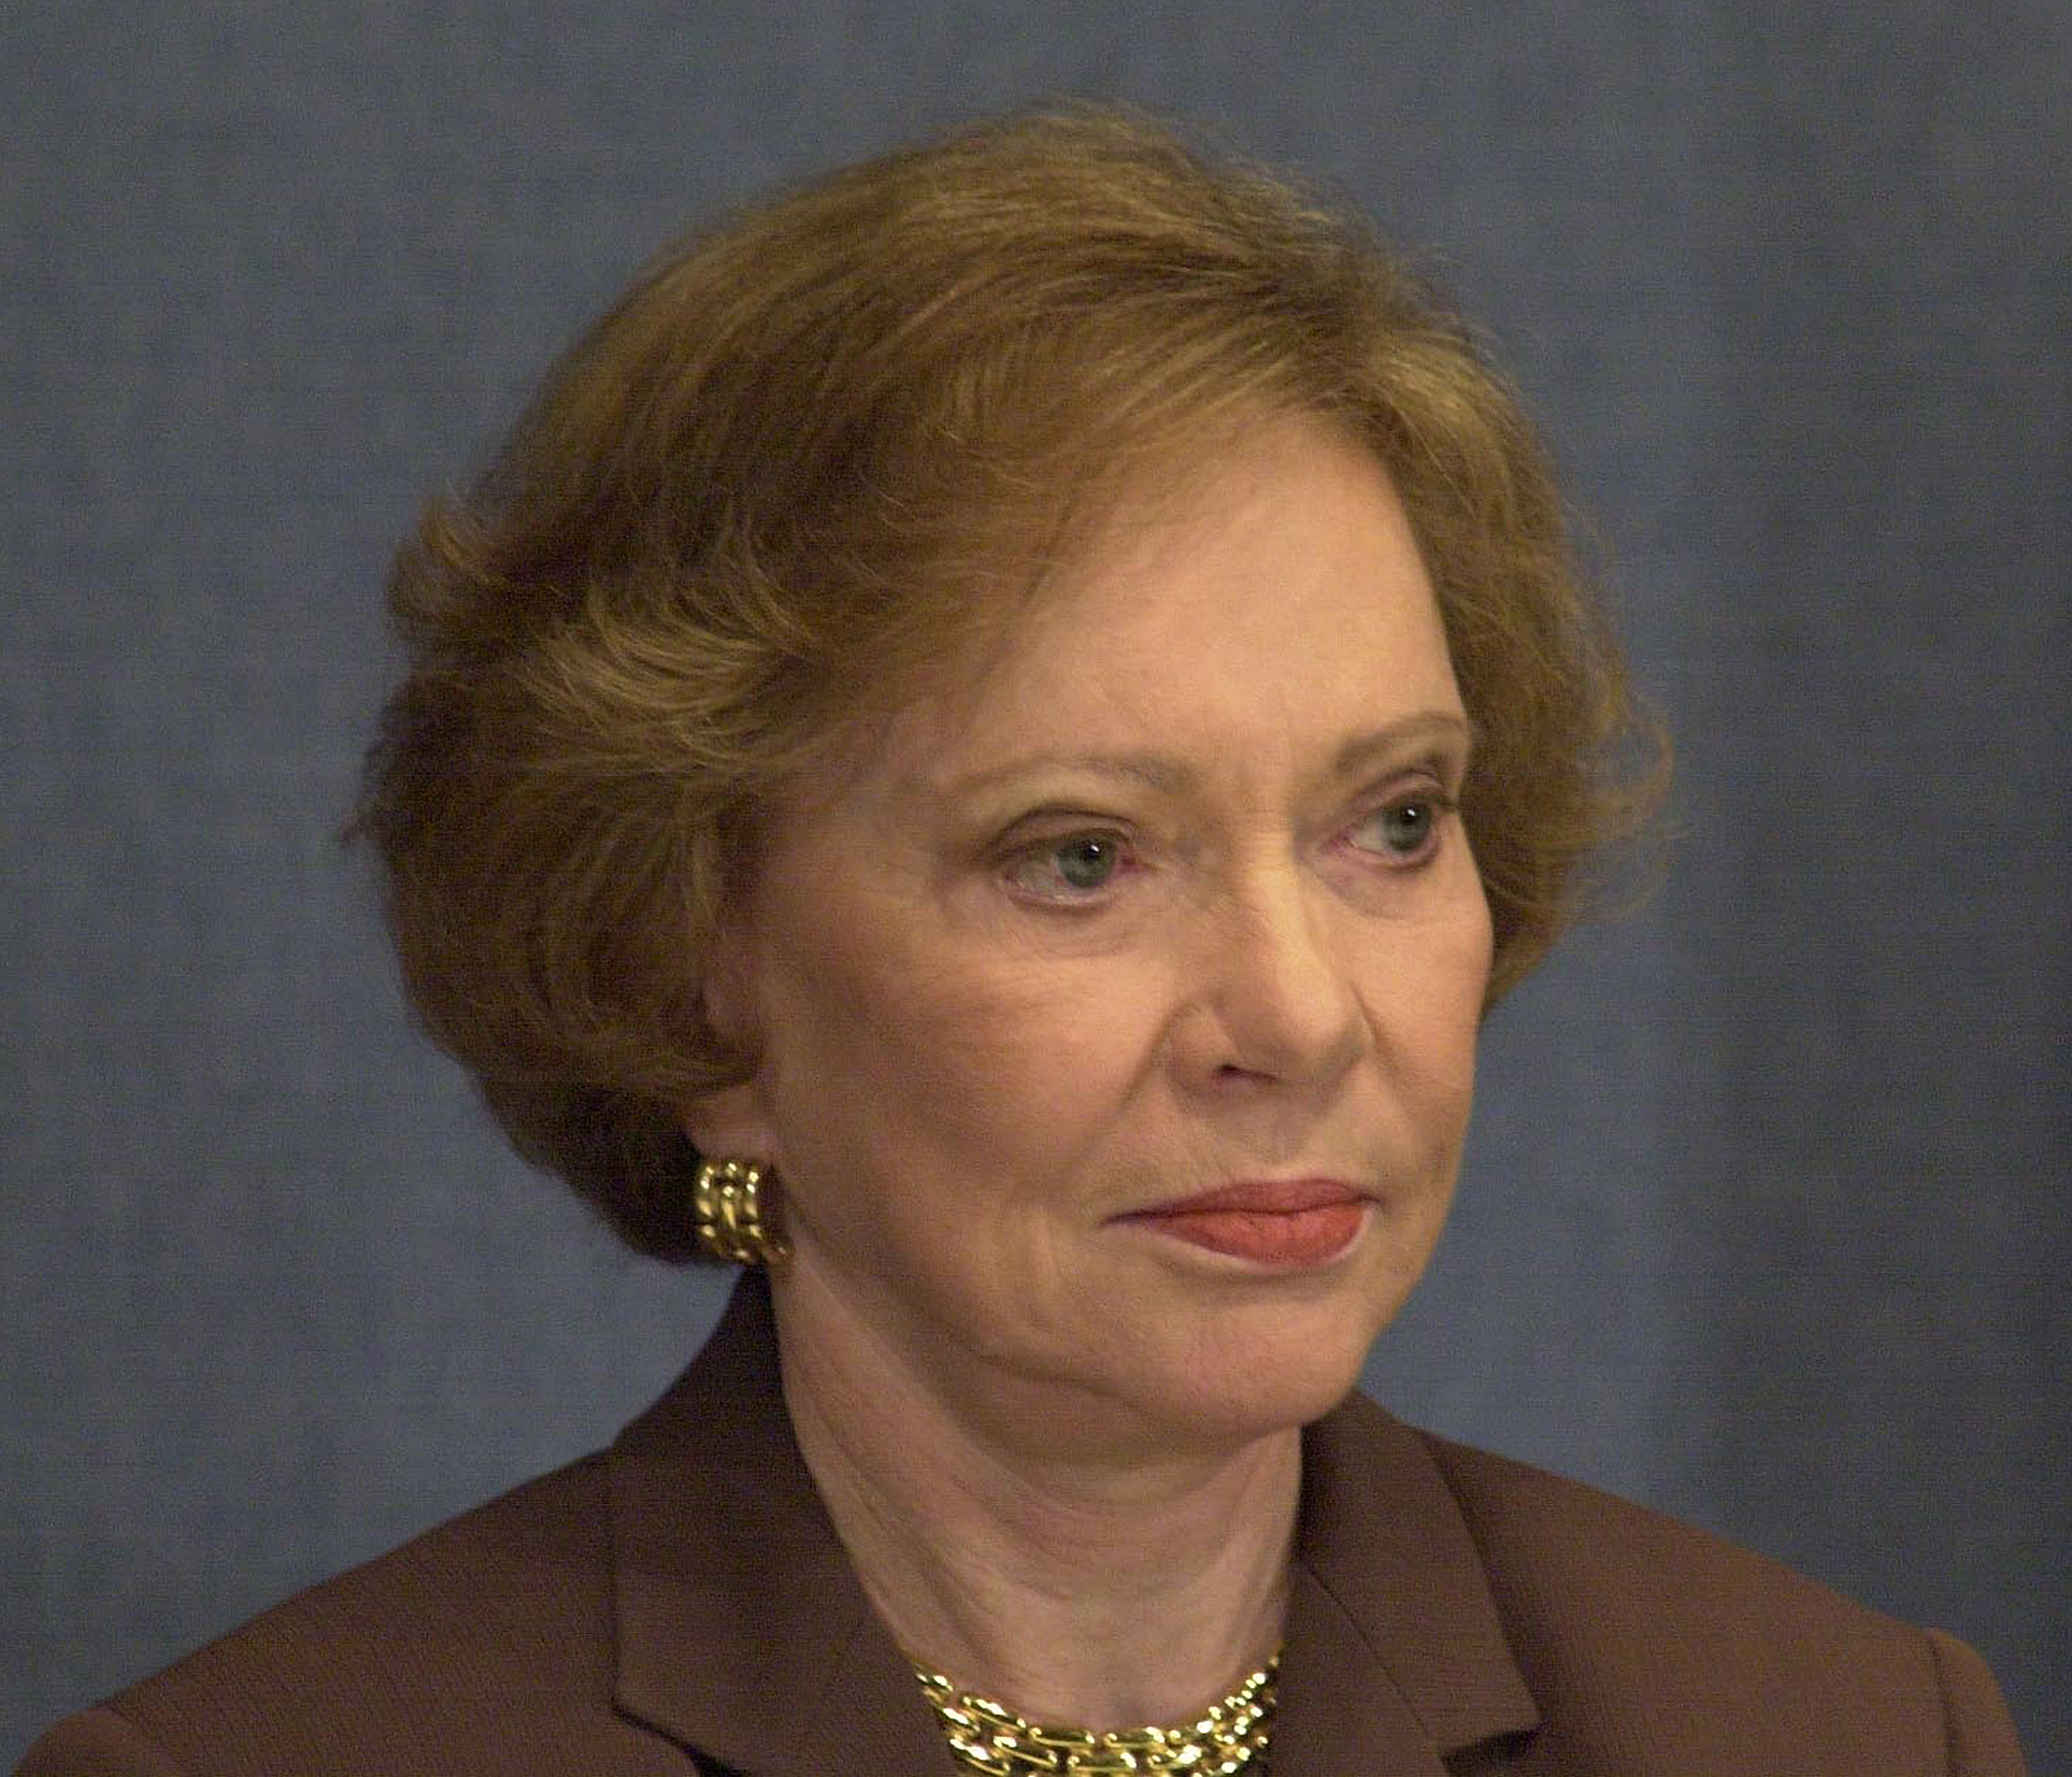 Former U.S. First Lady Rosalynn Carter at a press conference in Washington, DC. on December 5, 2001 | Source: Getty Images